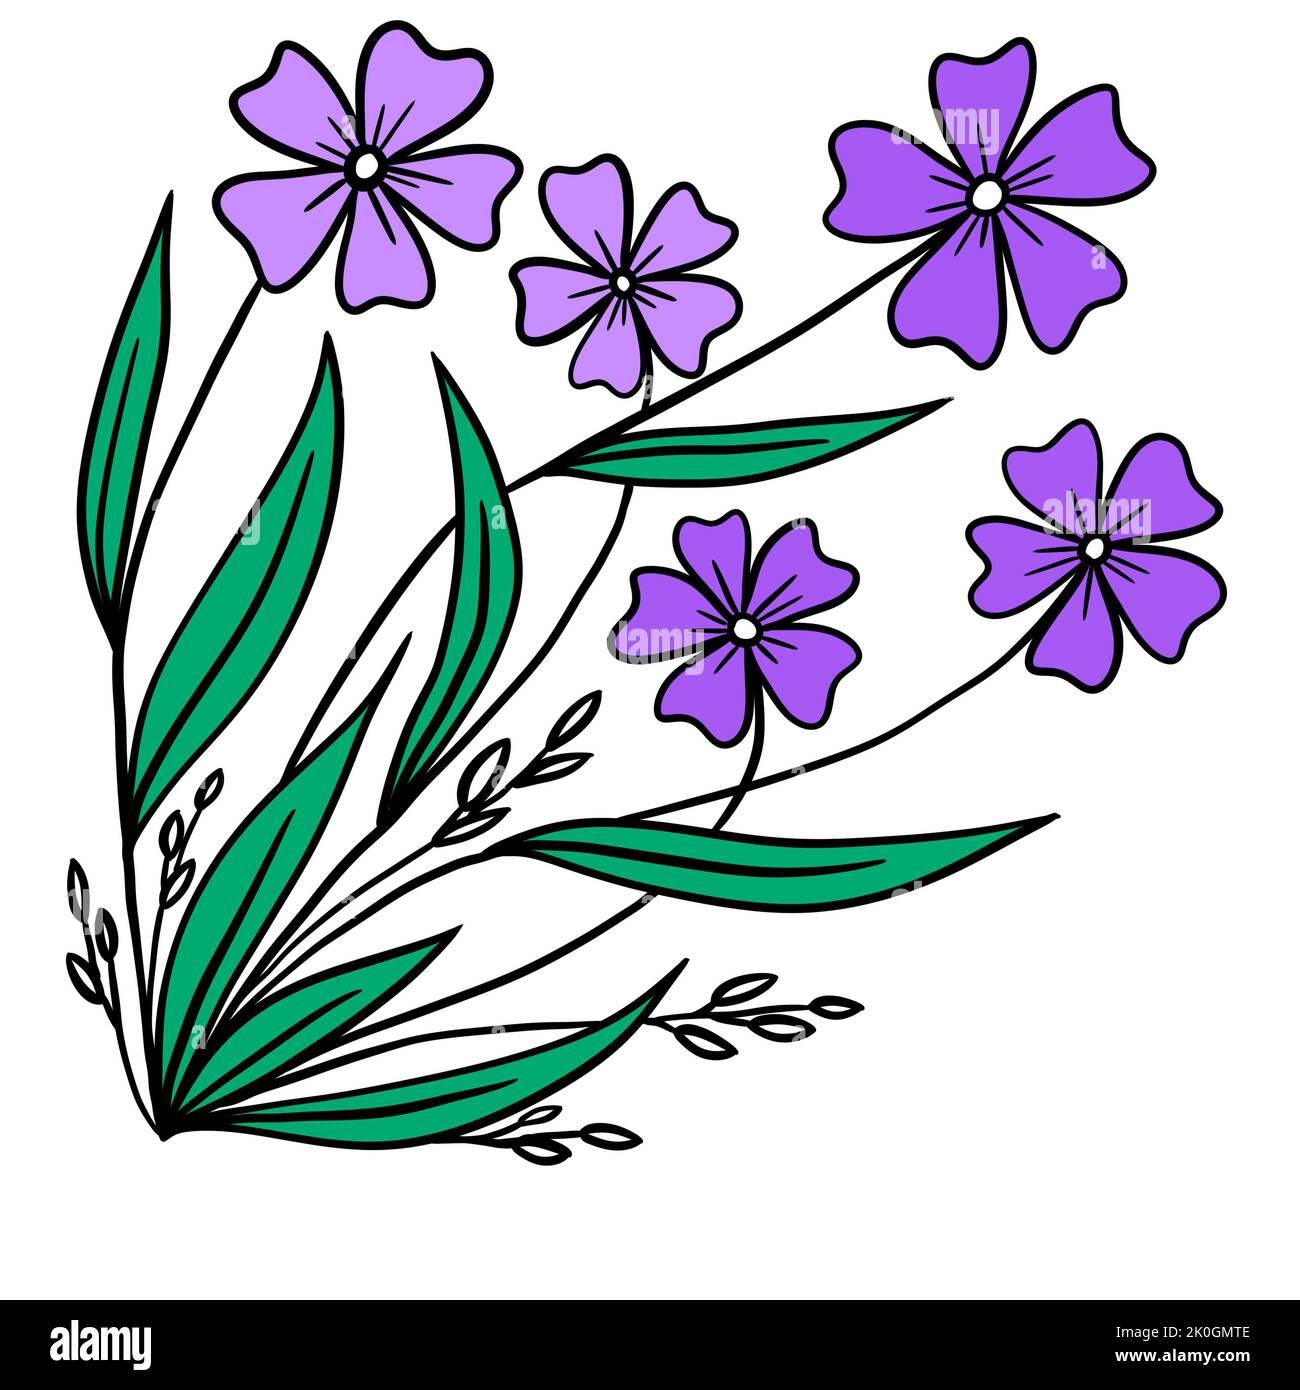 Hand drawn floral bouquet with purple flowers green leaves, corner composition. Garden wild flowers periwinkle, elegant simple minimalist design, sketch bloom plant herb, outdoor nature Stock Photo